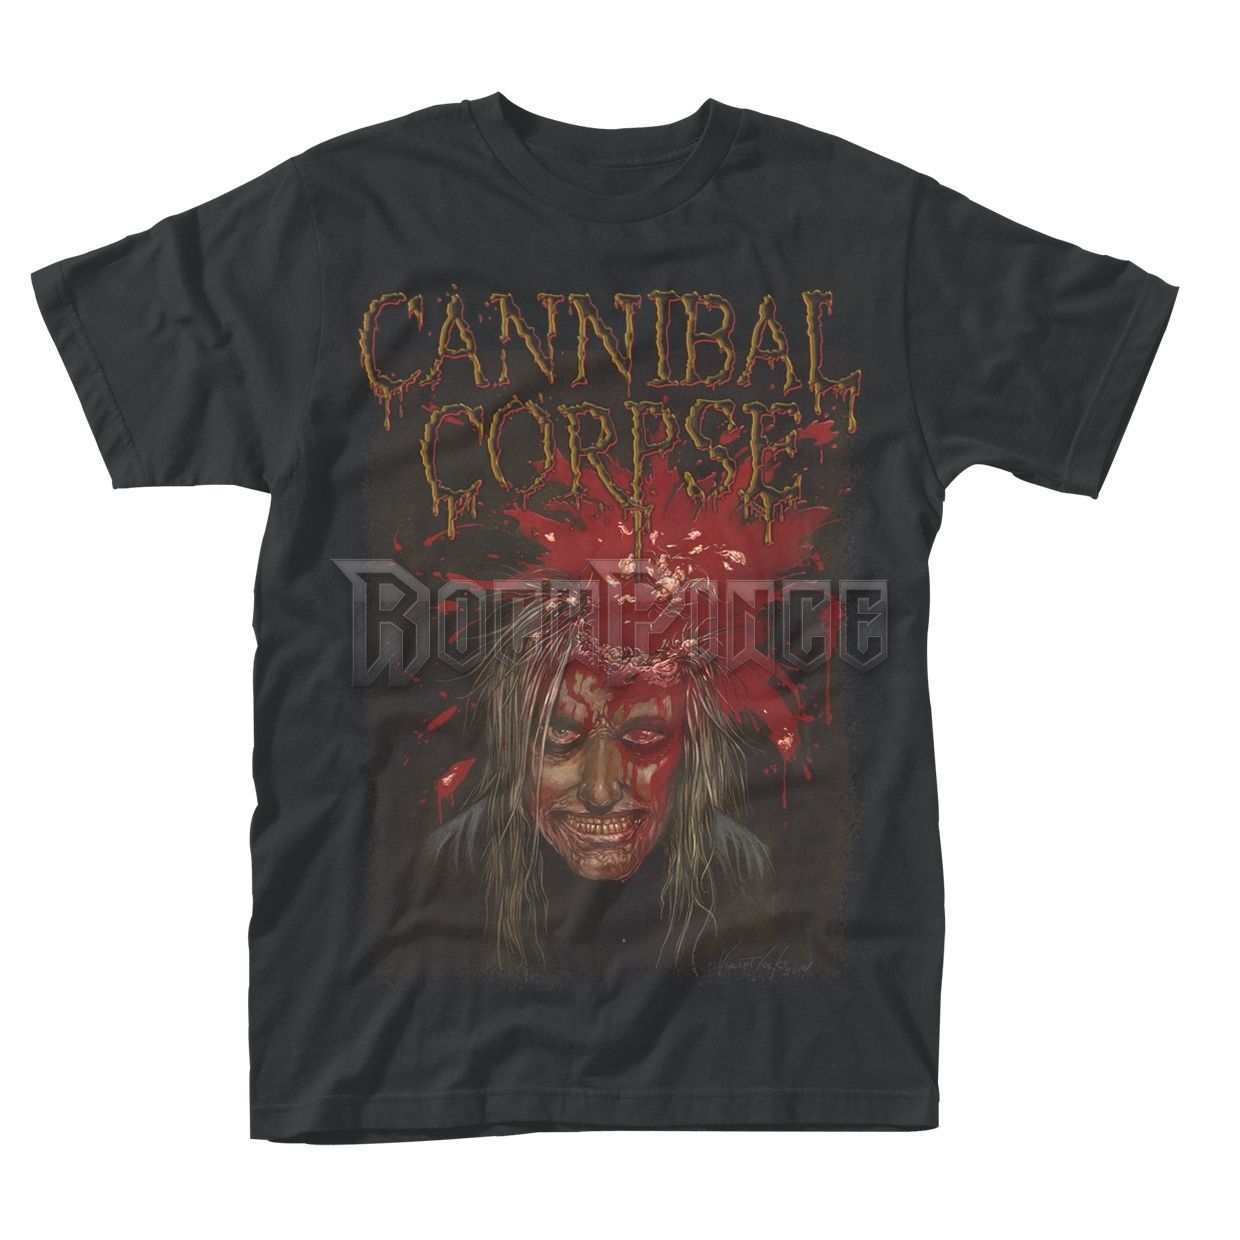 CANNIBAL CORPSE - IMPACT SPATTER - PH9851